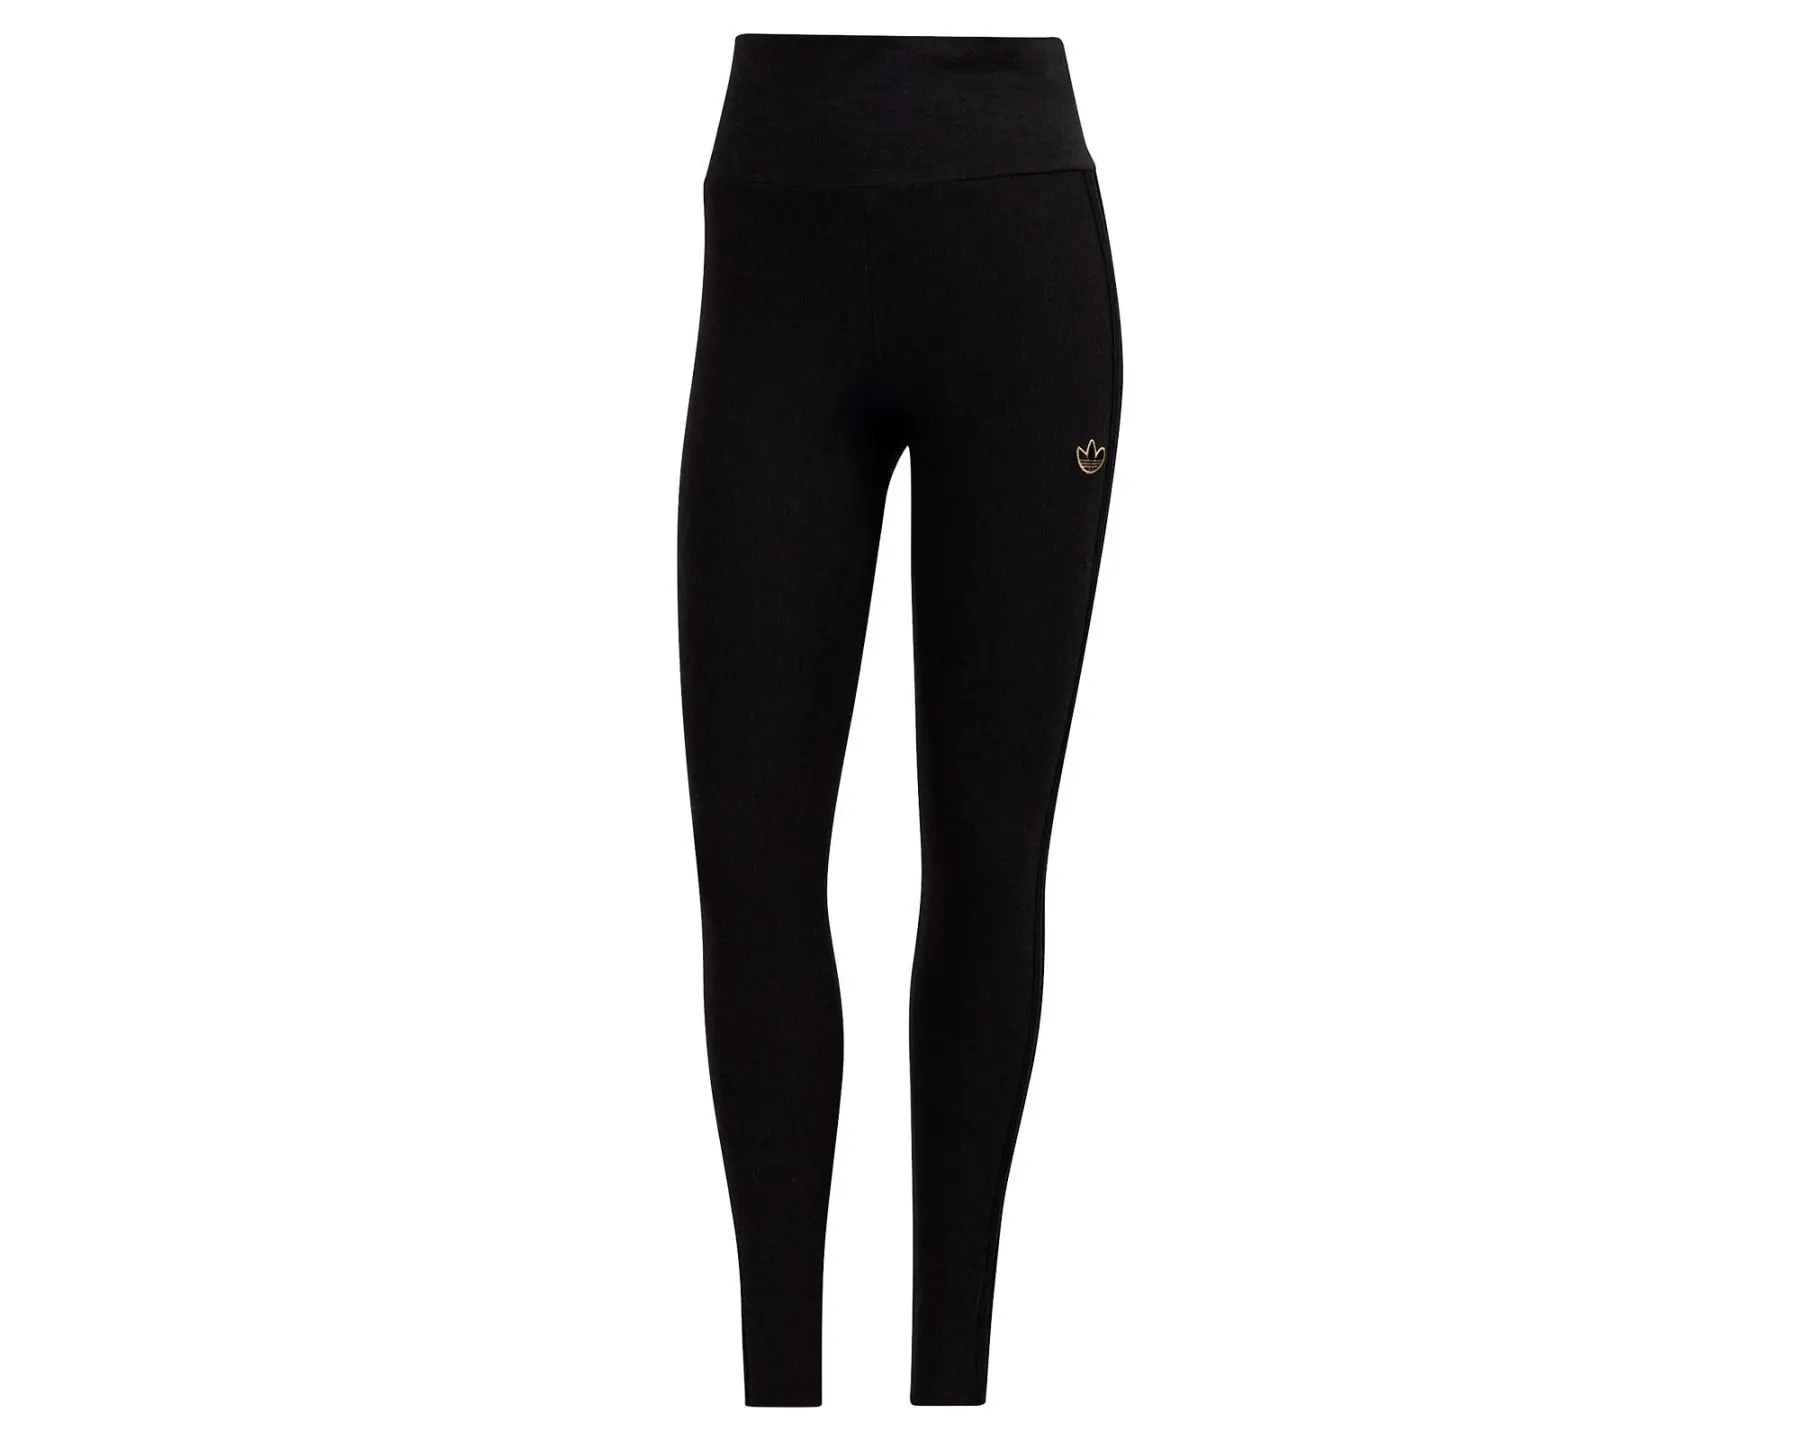 Adidas Original Women's Training Tights Black Color with High Cotton Content and High Waist Extra Comfort Sport Walking Yoga